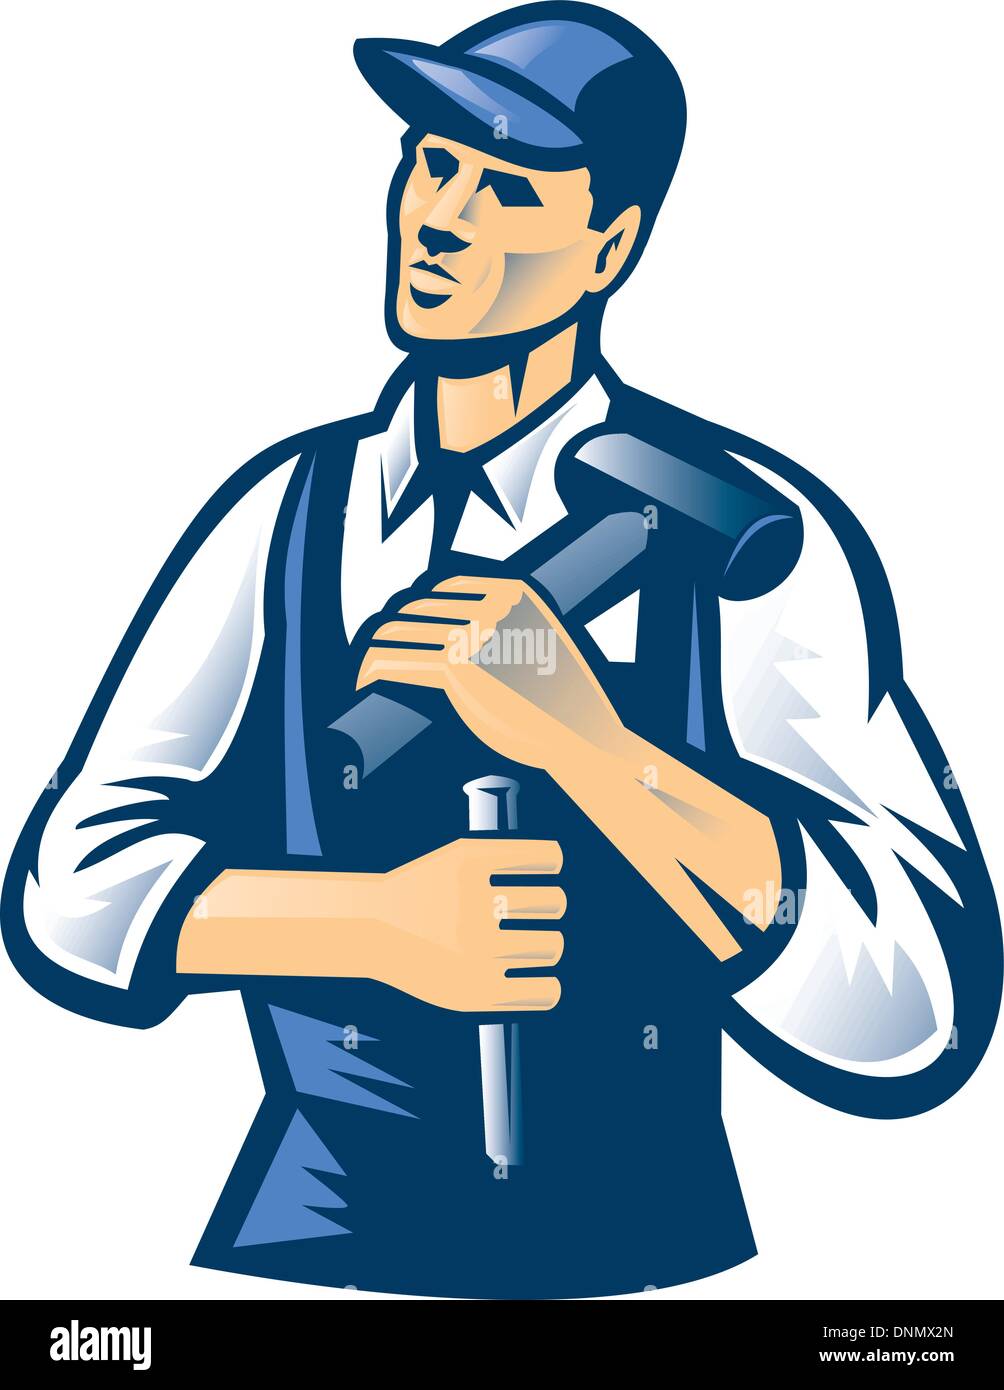 Illustration of a carpenter wearing hat with hammer and cold chisel looking up done in retro style. Stock Vector